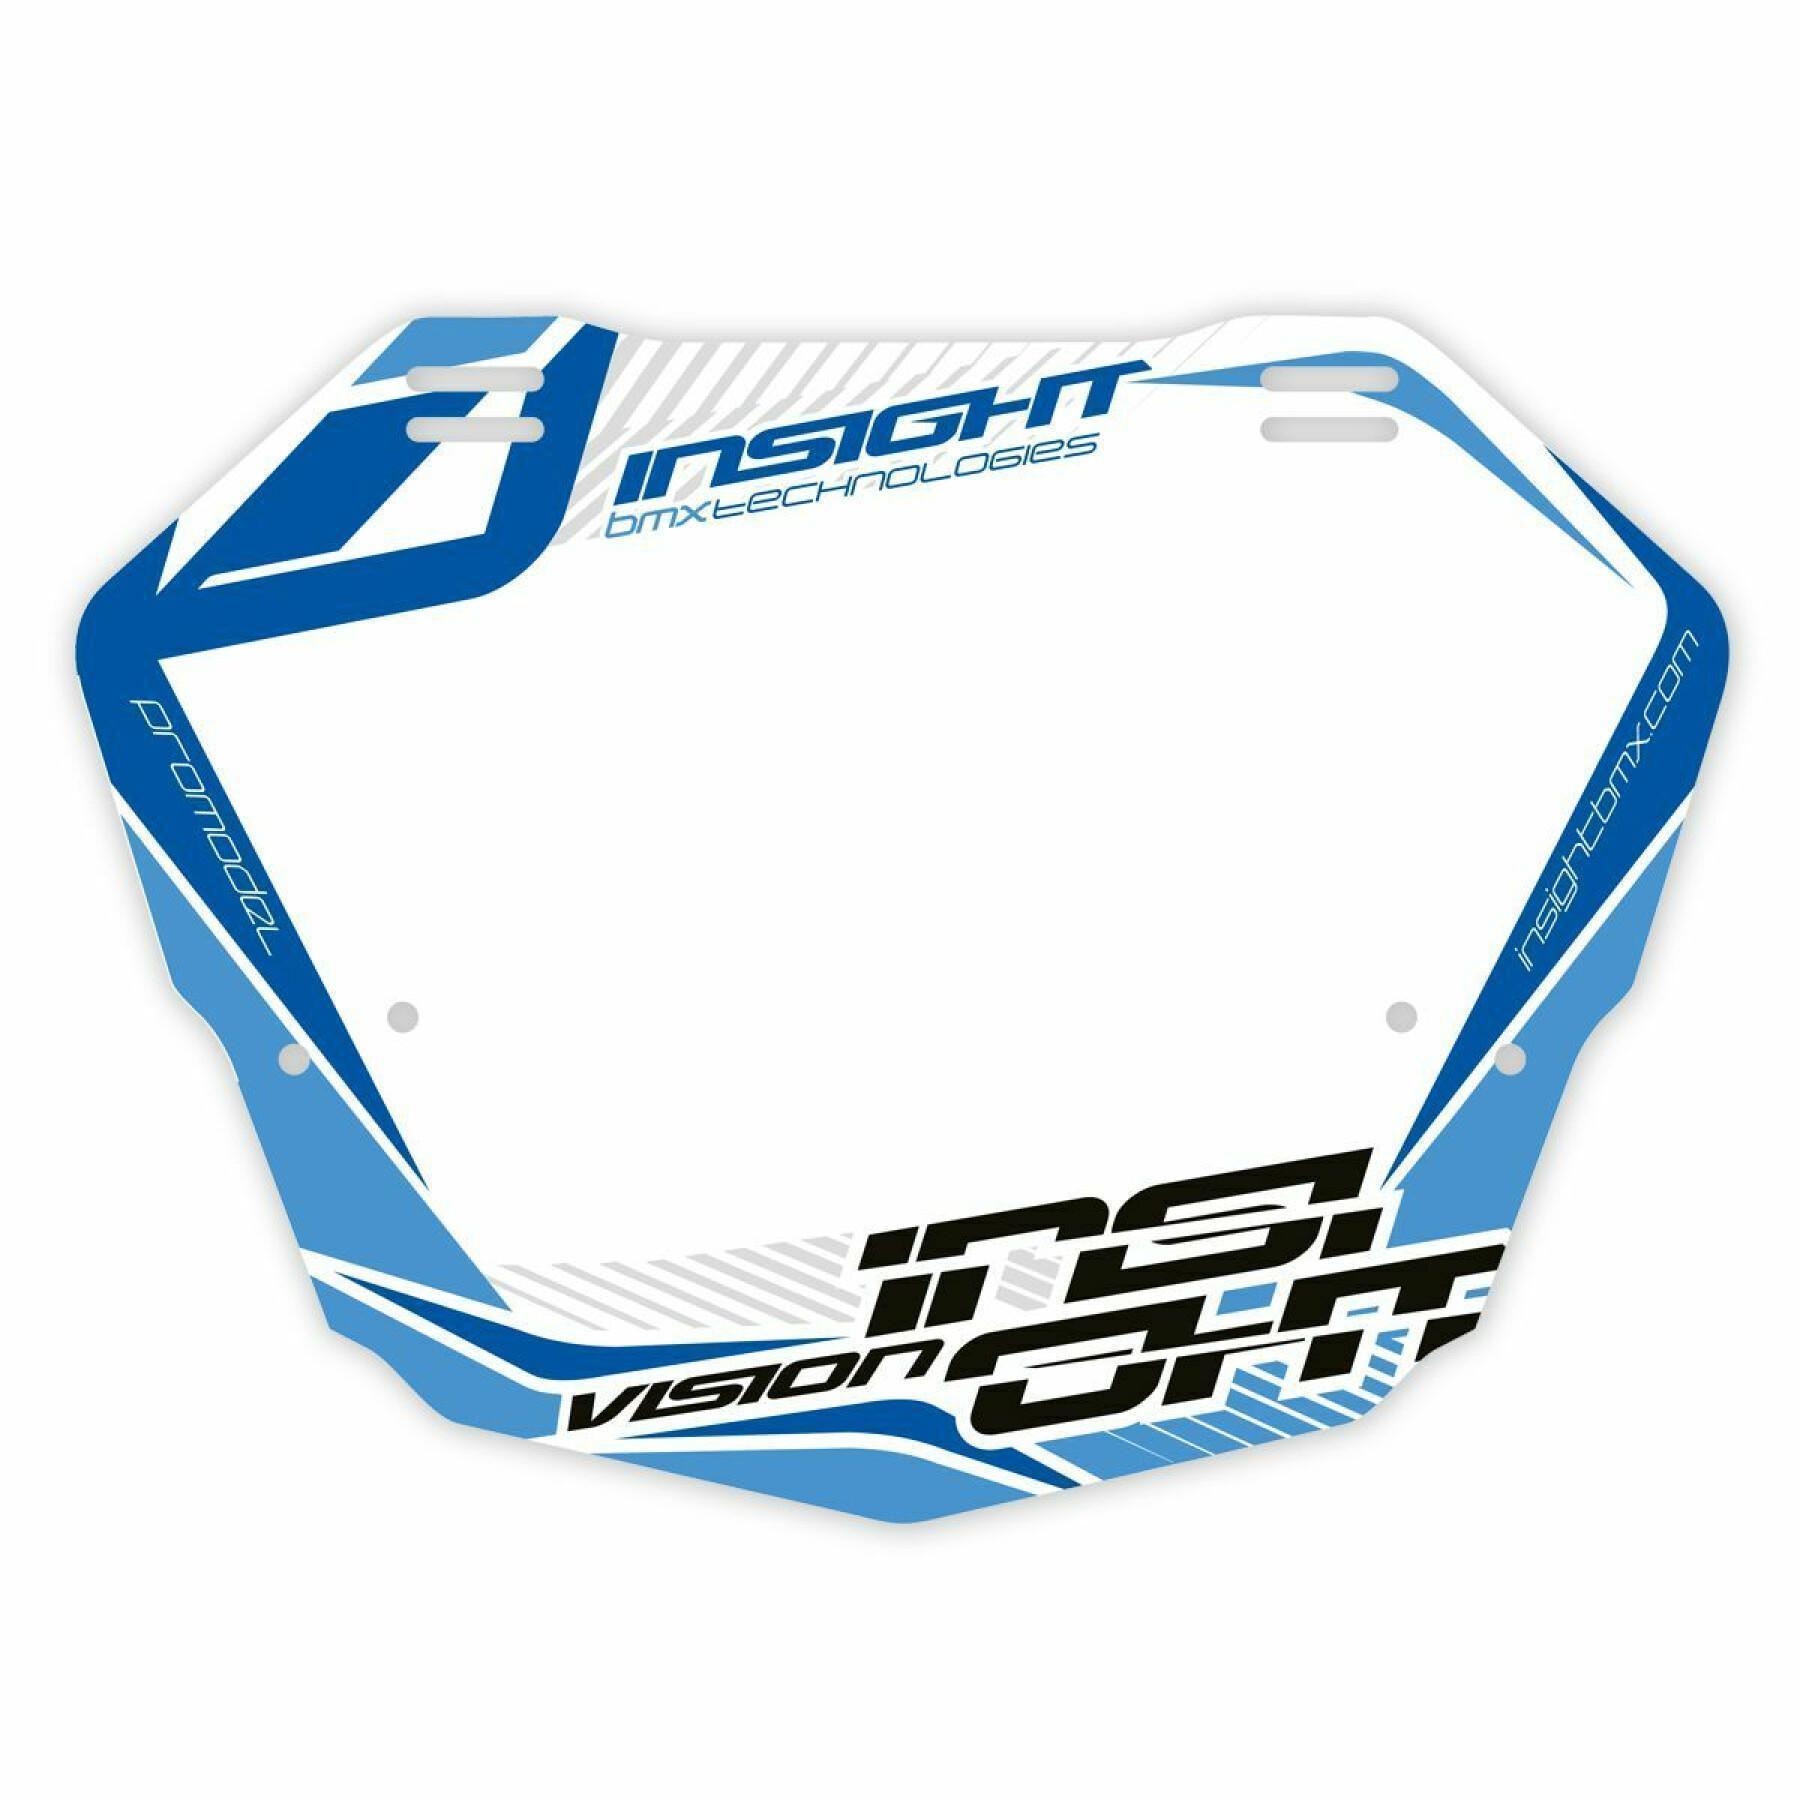 Plaat Insight vision 2 pro